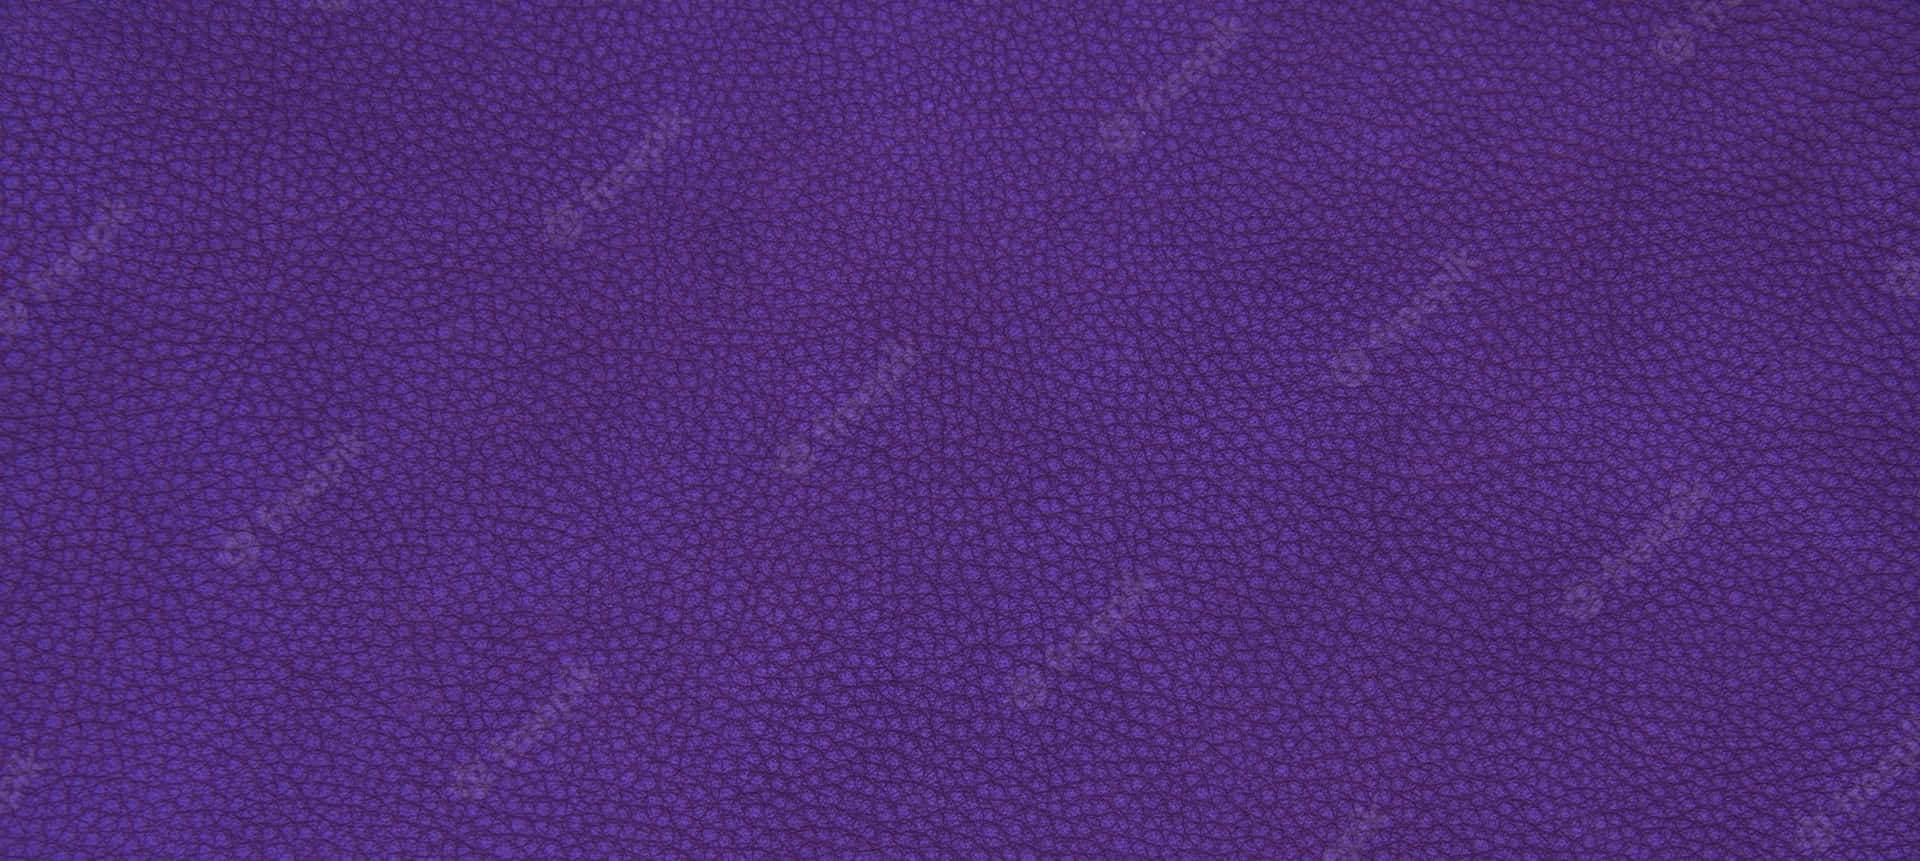 Purple Leather Texture Background Wallpaper